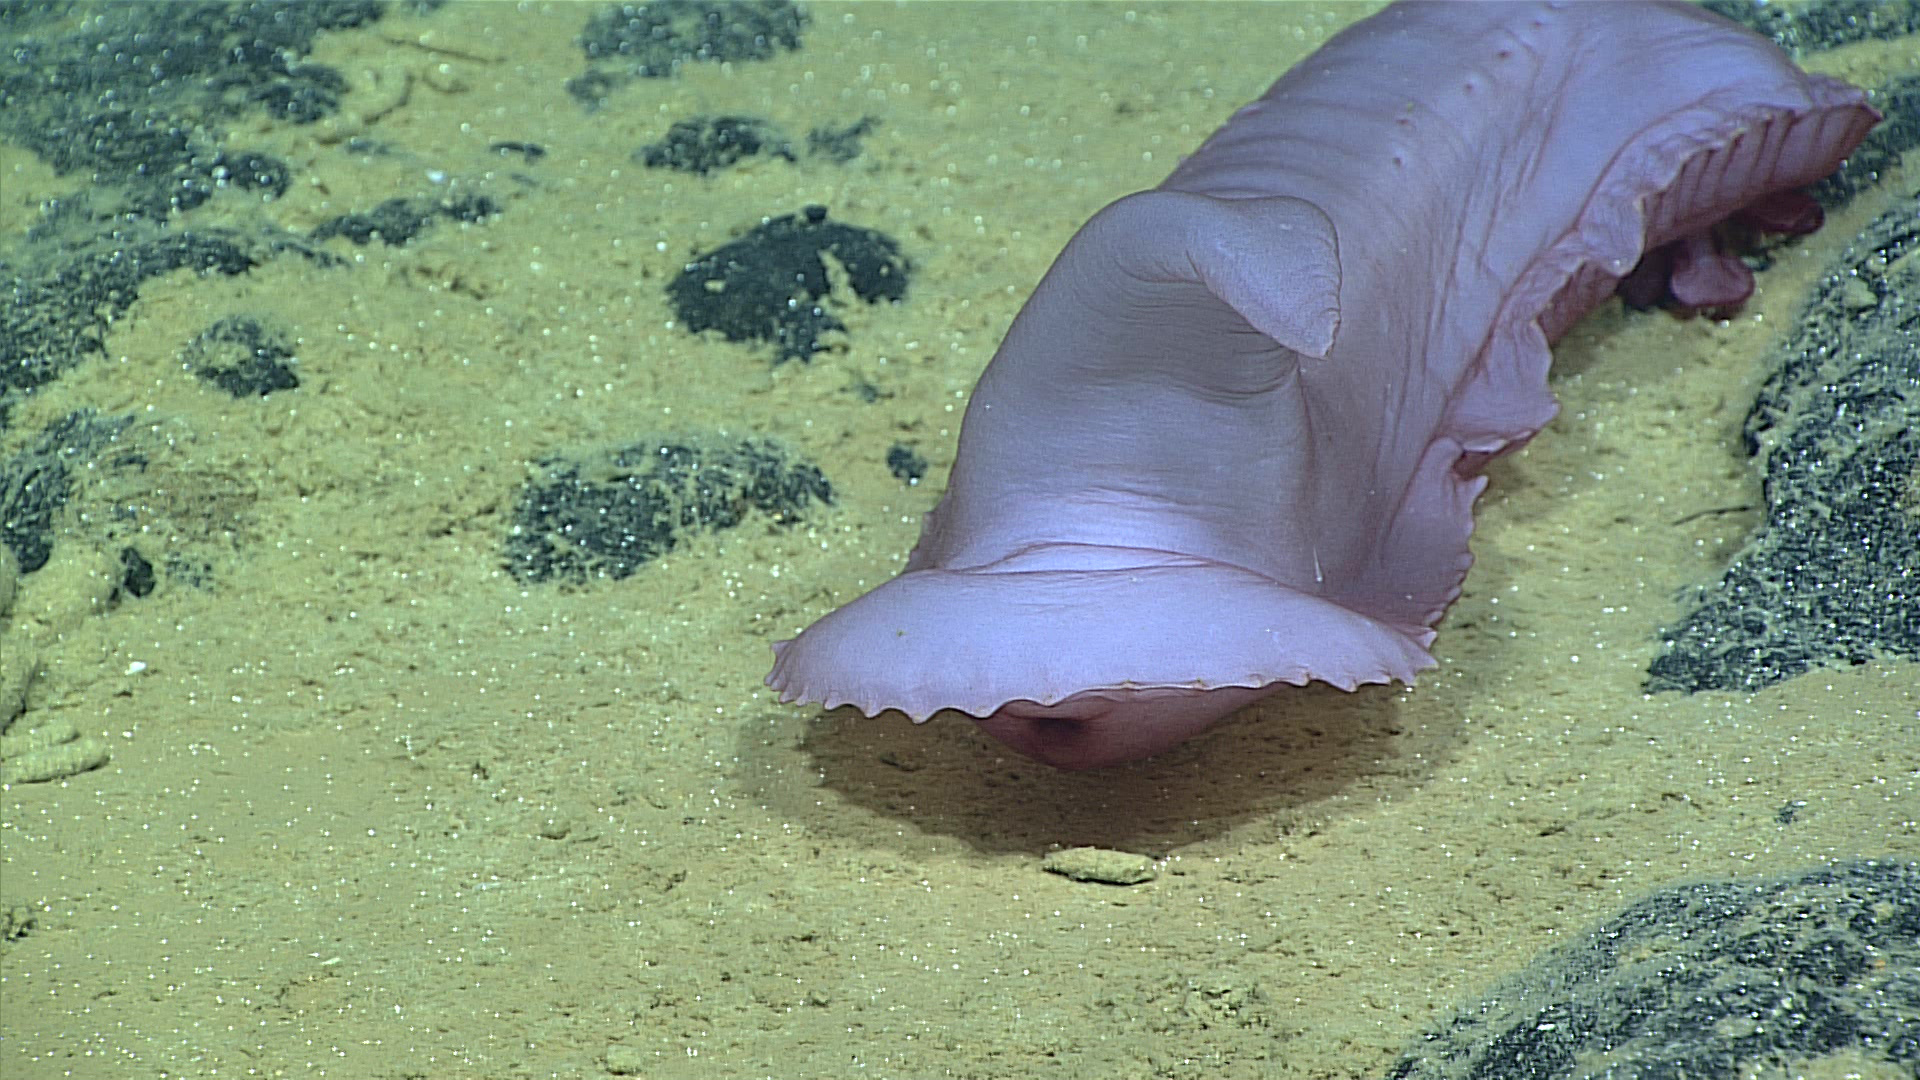 The purple holothurian, Psychropotes sp., feeds on organic sediment deposits on the rocky substrate. This species has a distinct 'sail' over its posterior end. The function of the sail or what the animal uses it for isn't yet known.